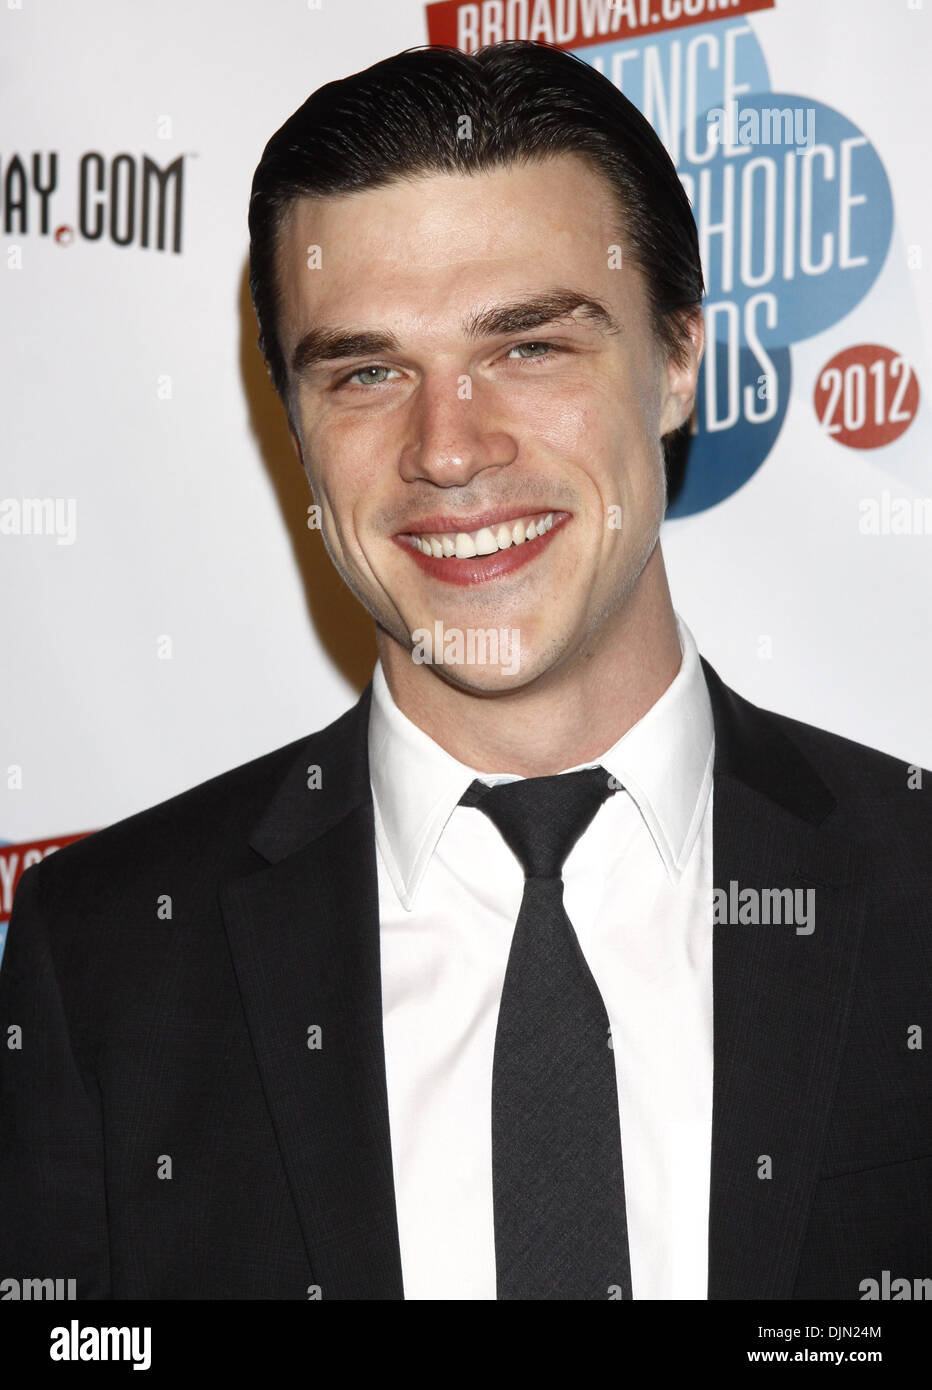 Finn Wittrock 13th Annual Broadway.com Audience Choice Awards held at Allen Room at Jazz At Lincoln Center - Arrivals Stock Photo